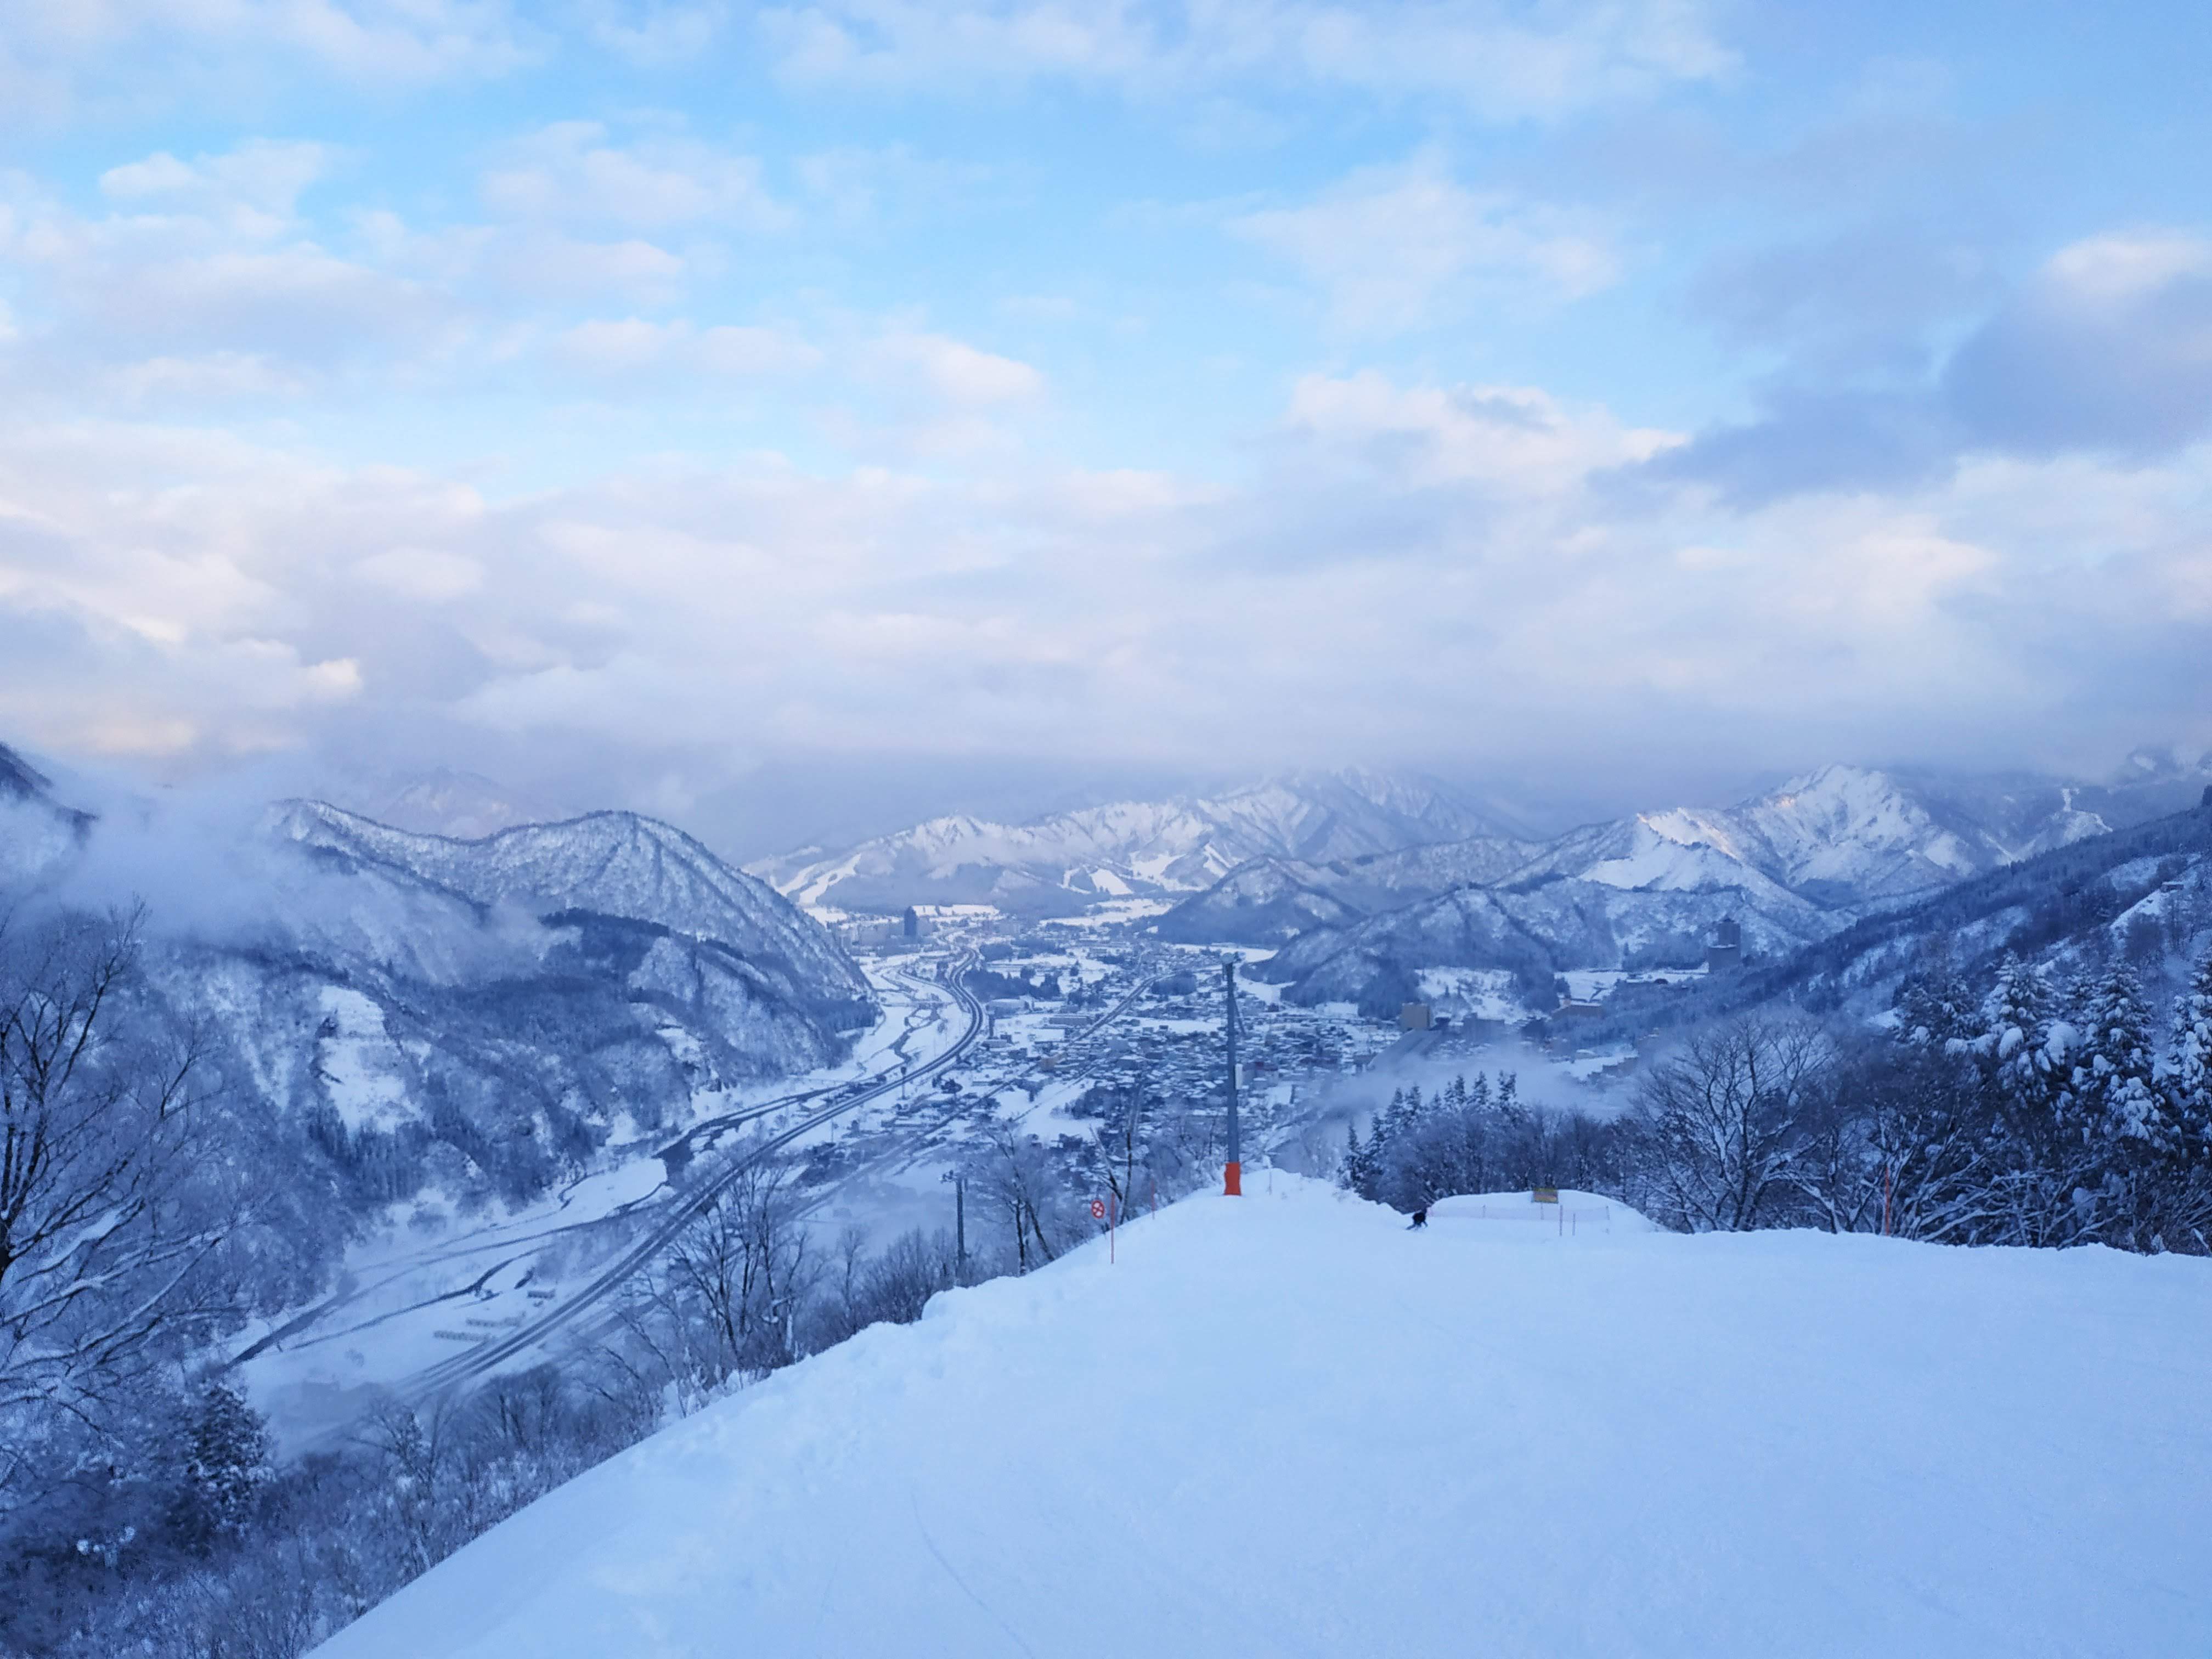 The view as you start the downhill course back to the base at GALA Yuzawa